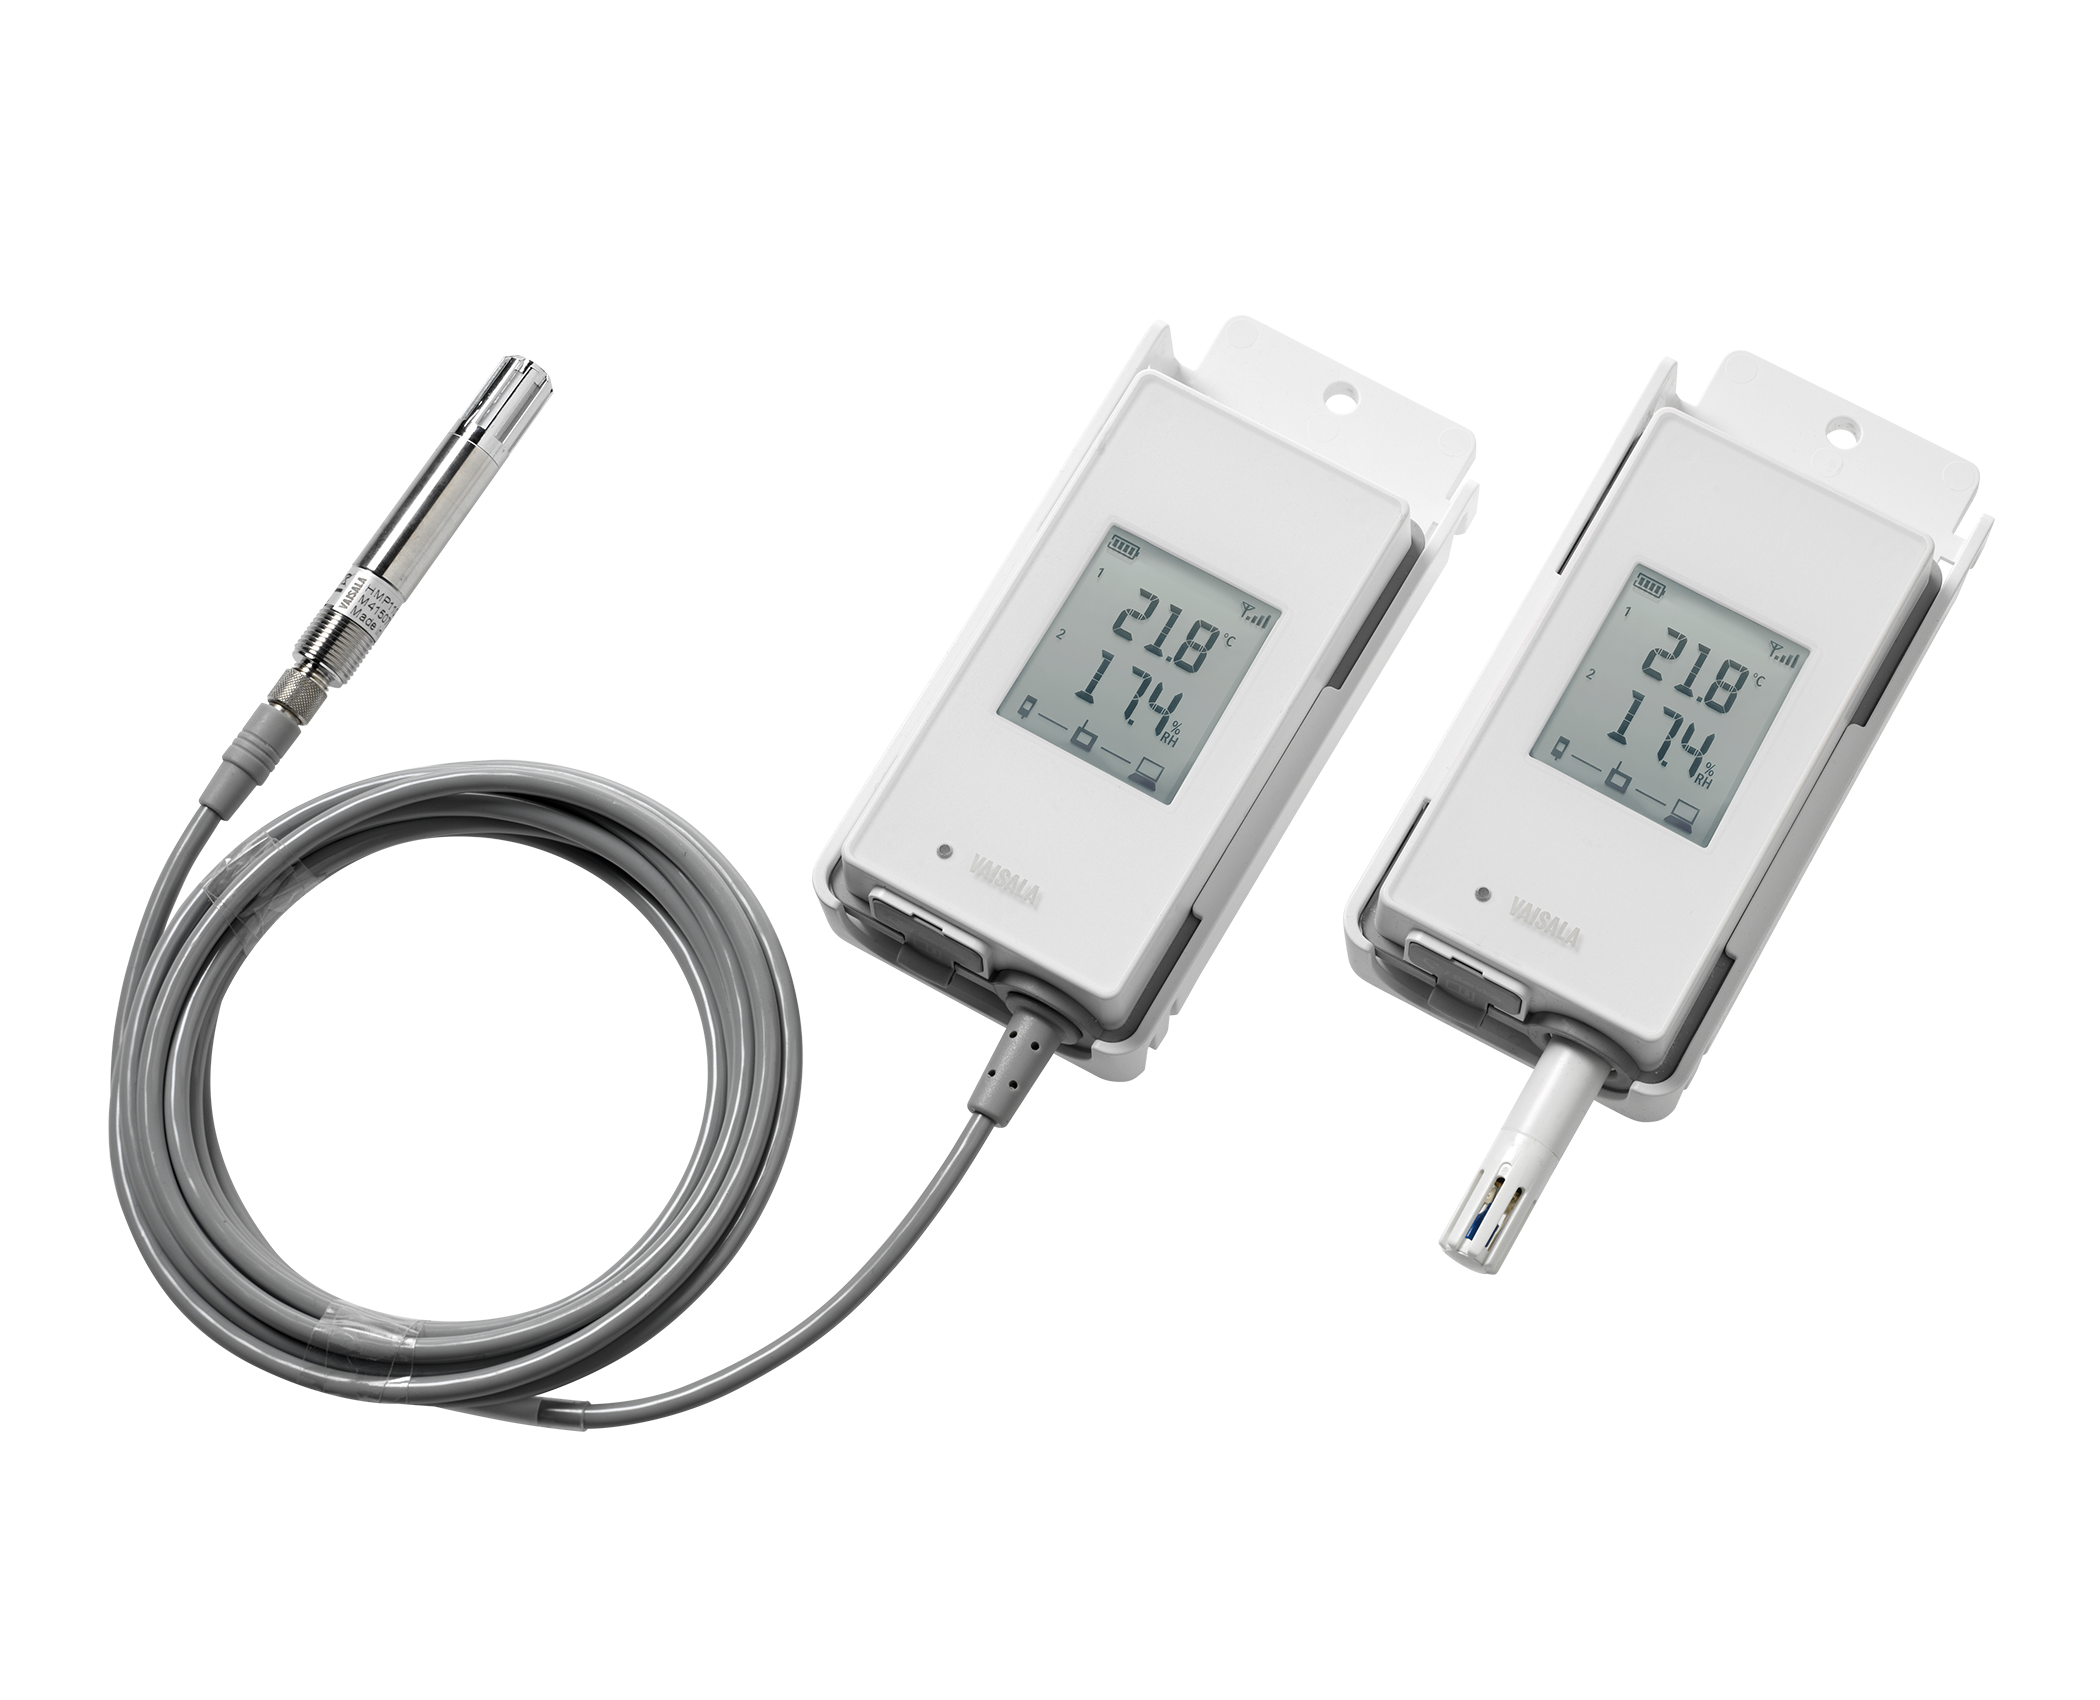 VaiNet Wireless Humidity and Temperature Data Logger RFL100 is available at Industrie Automation Graz, IAG, throughout Austria.